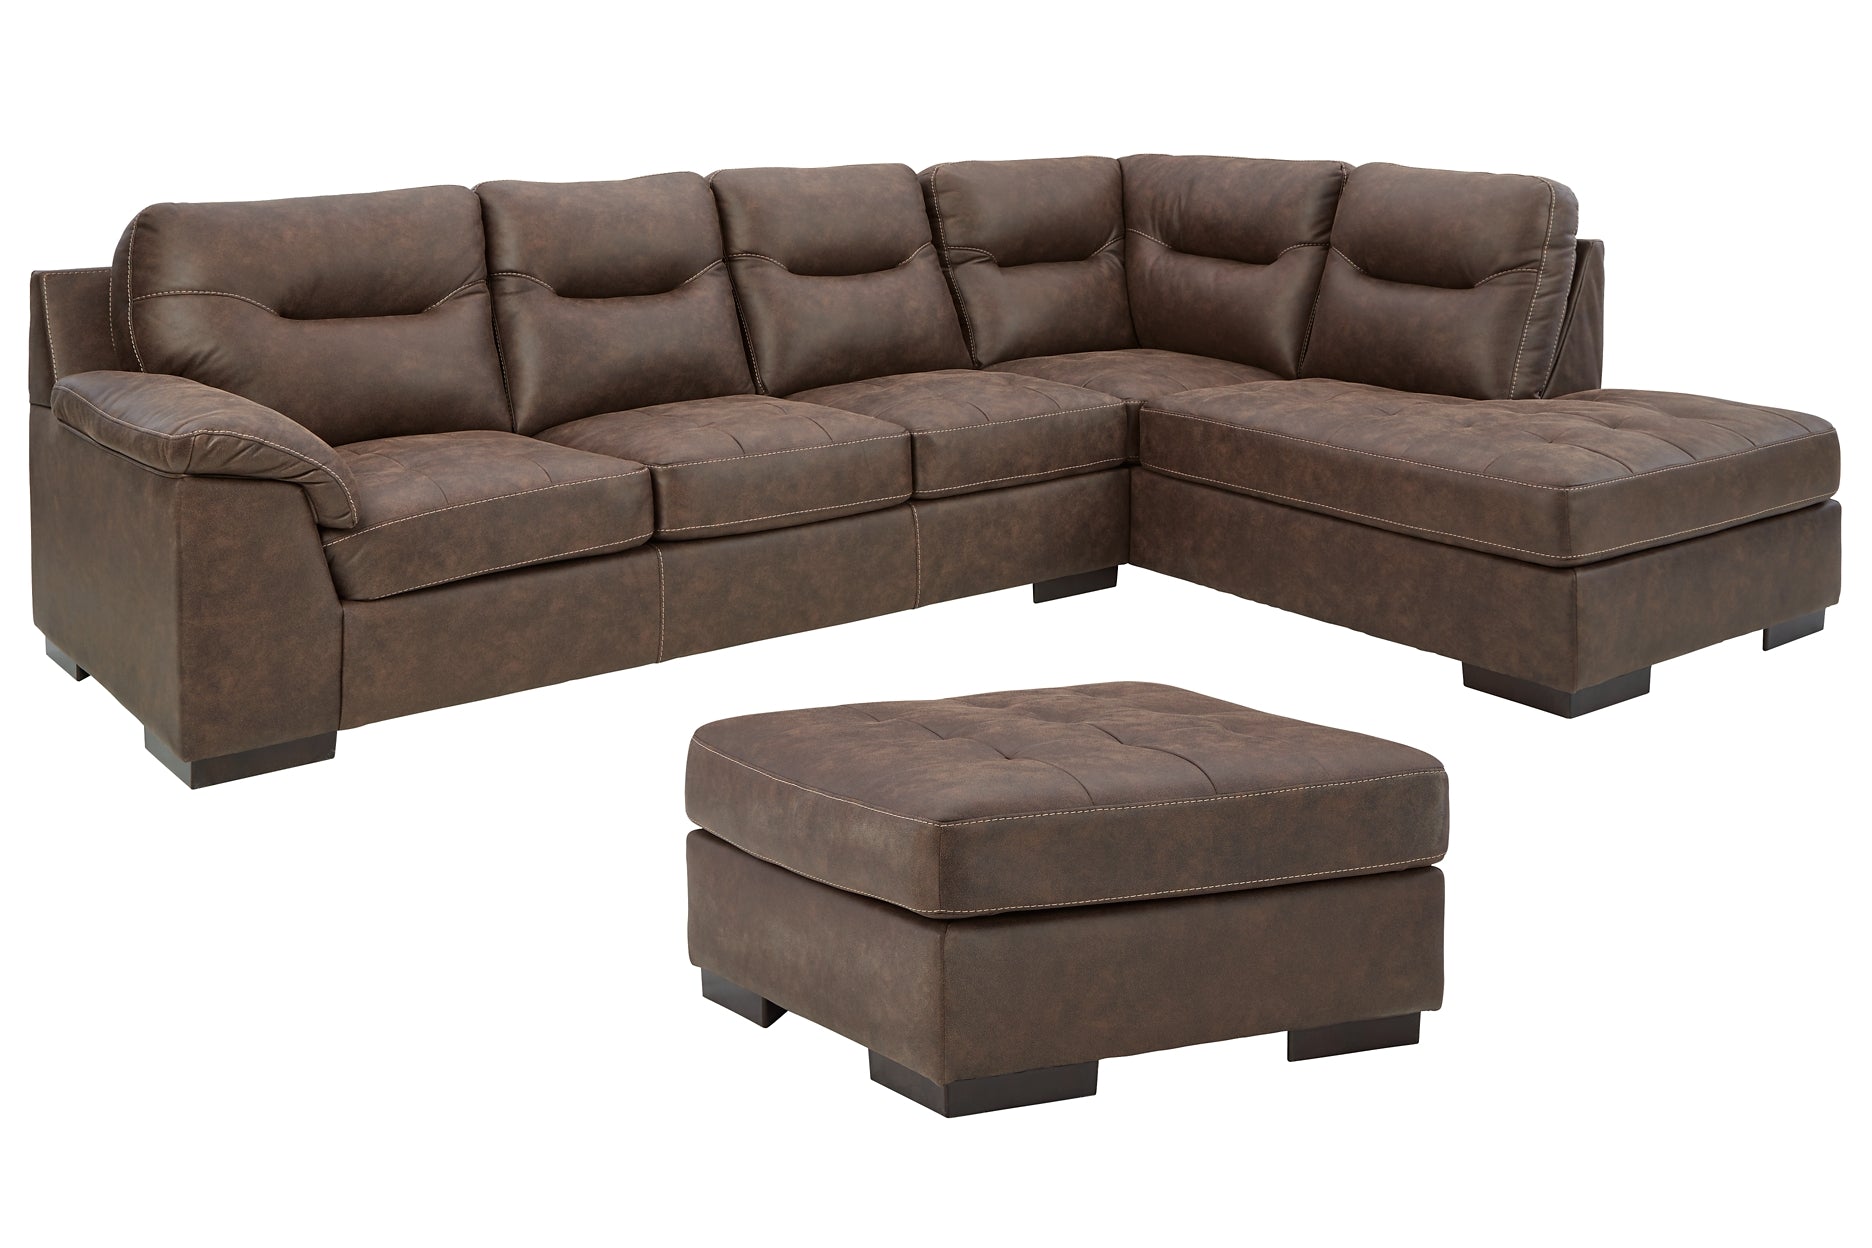 Maderla 2-Piece Sectional with Ottoman at Cloud 9 Mattress & Furniture furniture, home furnishing, home decor